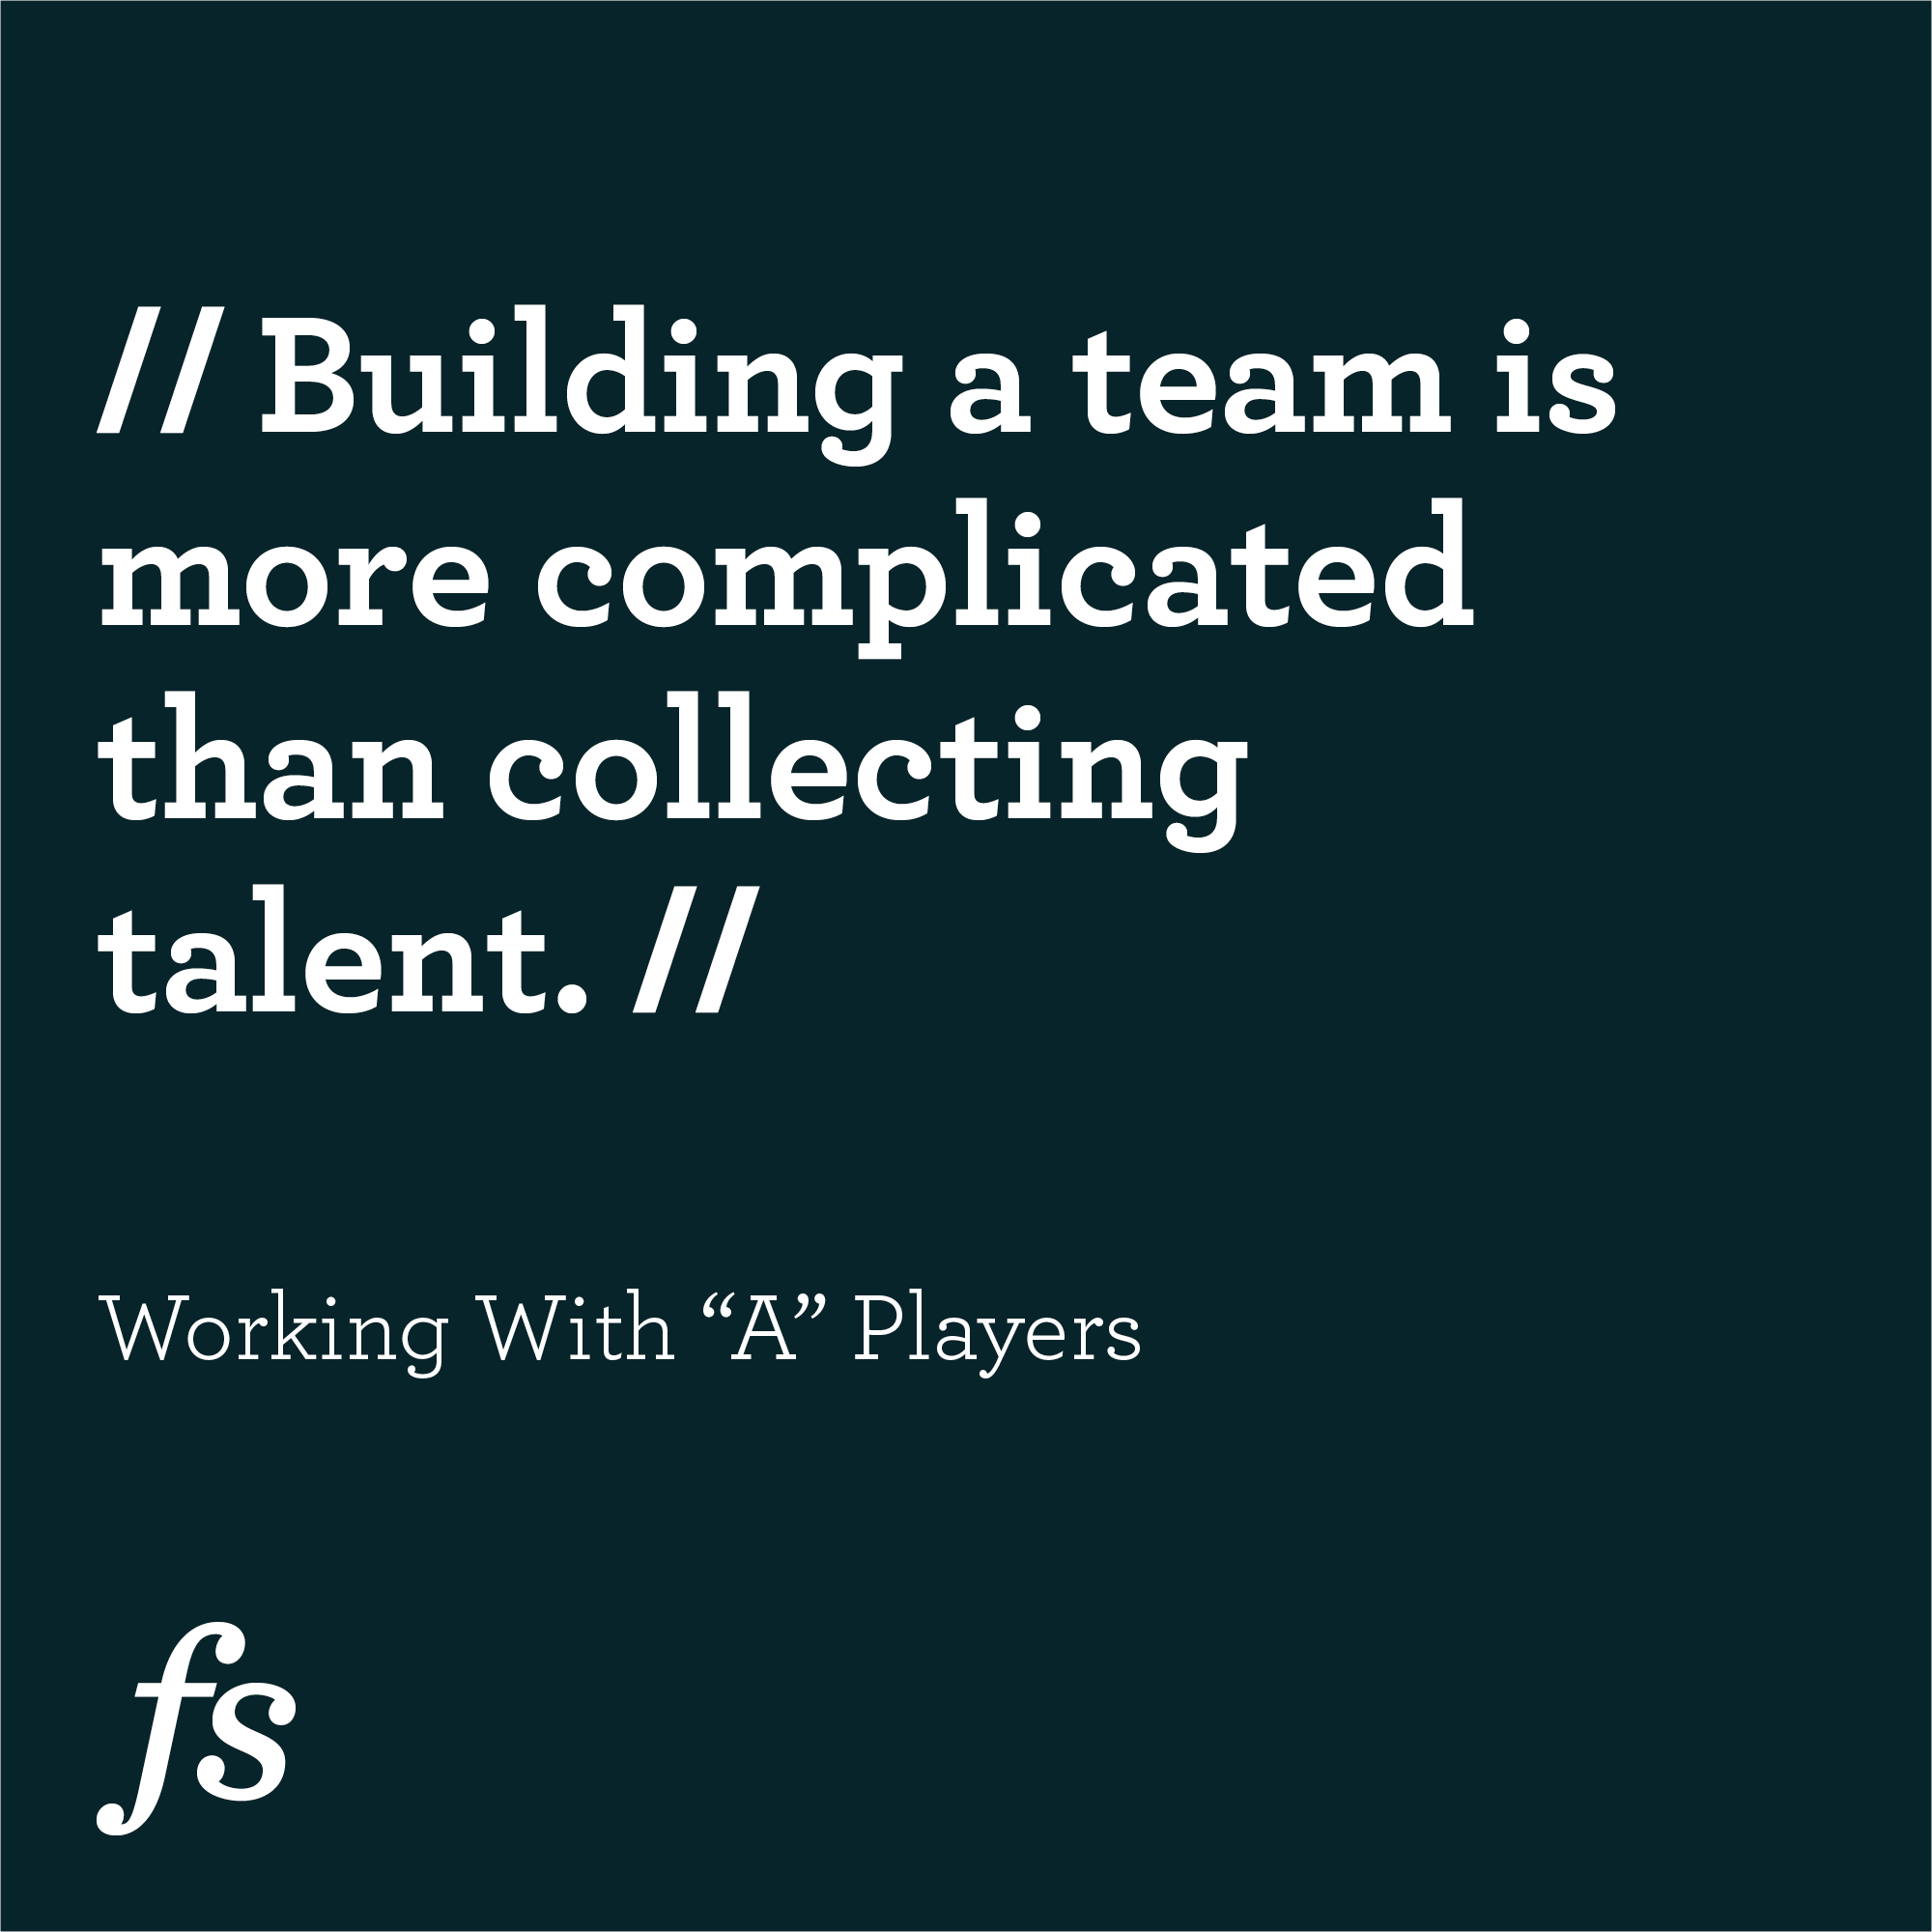 The Importance of Working With “A” Players